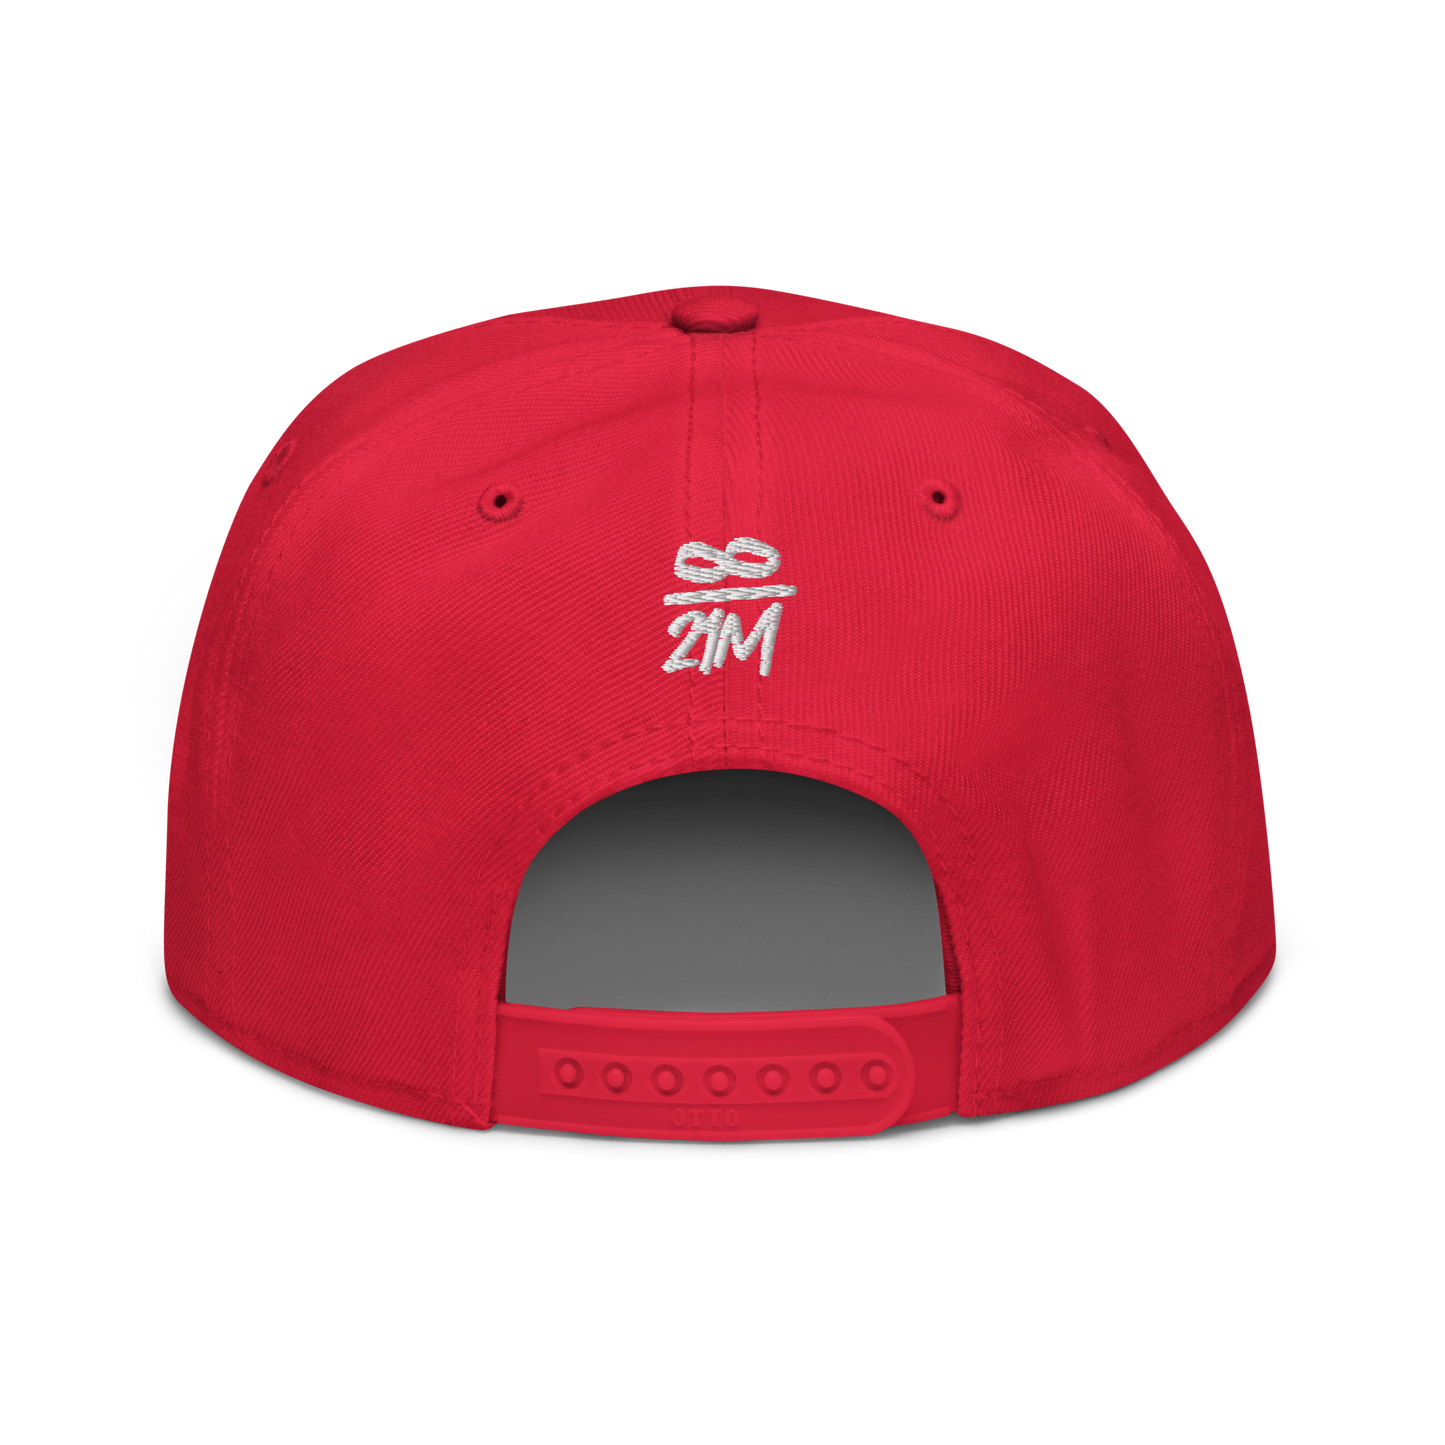 Back view of a red bitcoin snapback hat.